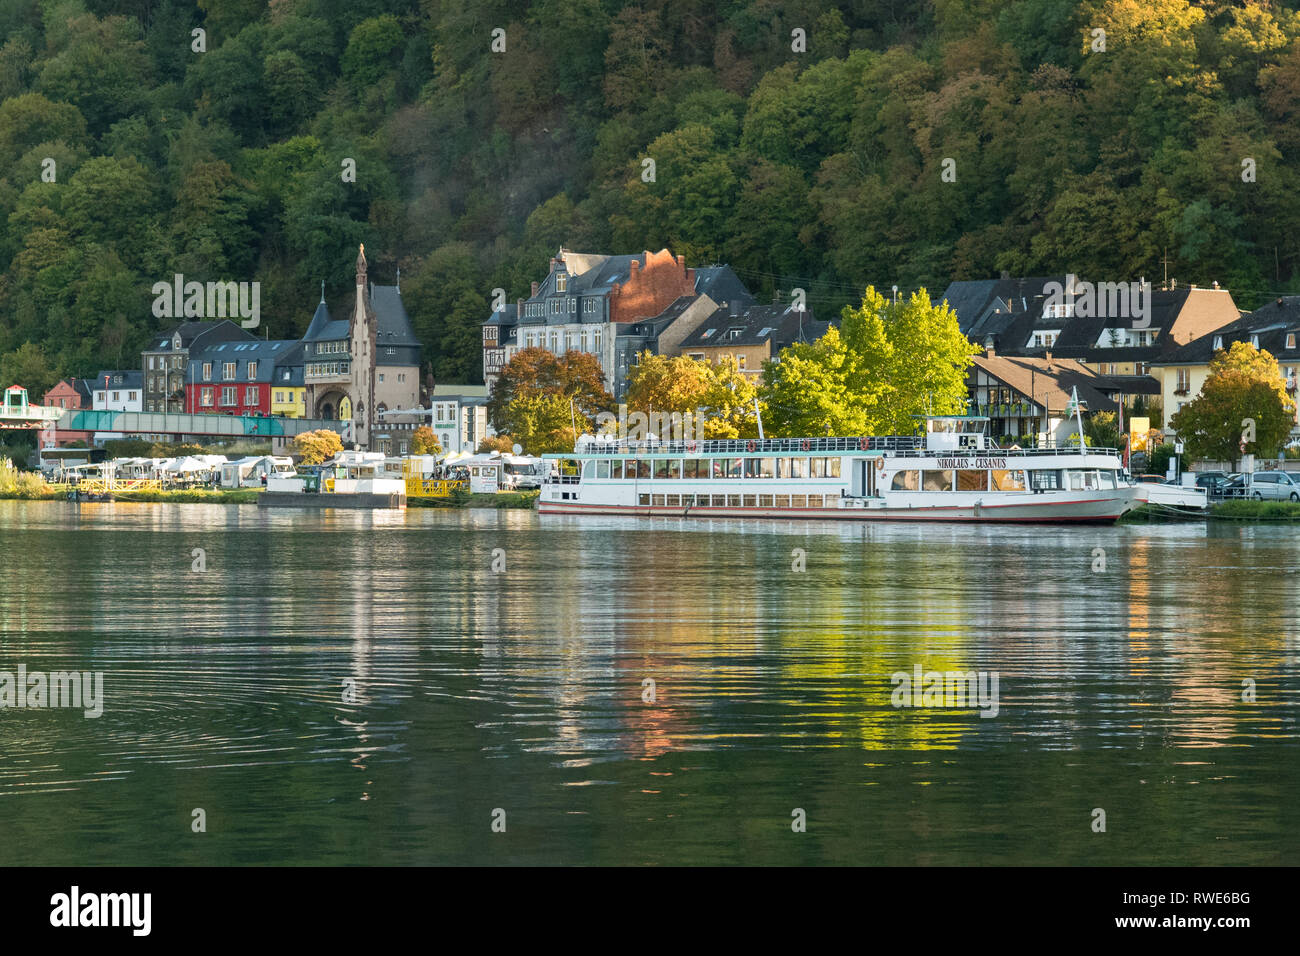 Traben-Trarbach - cruise boat moored in early autumn - Moselle Valley, Germany, Europe Stock Photo